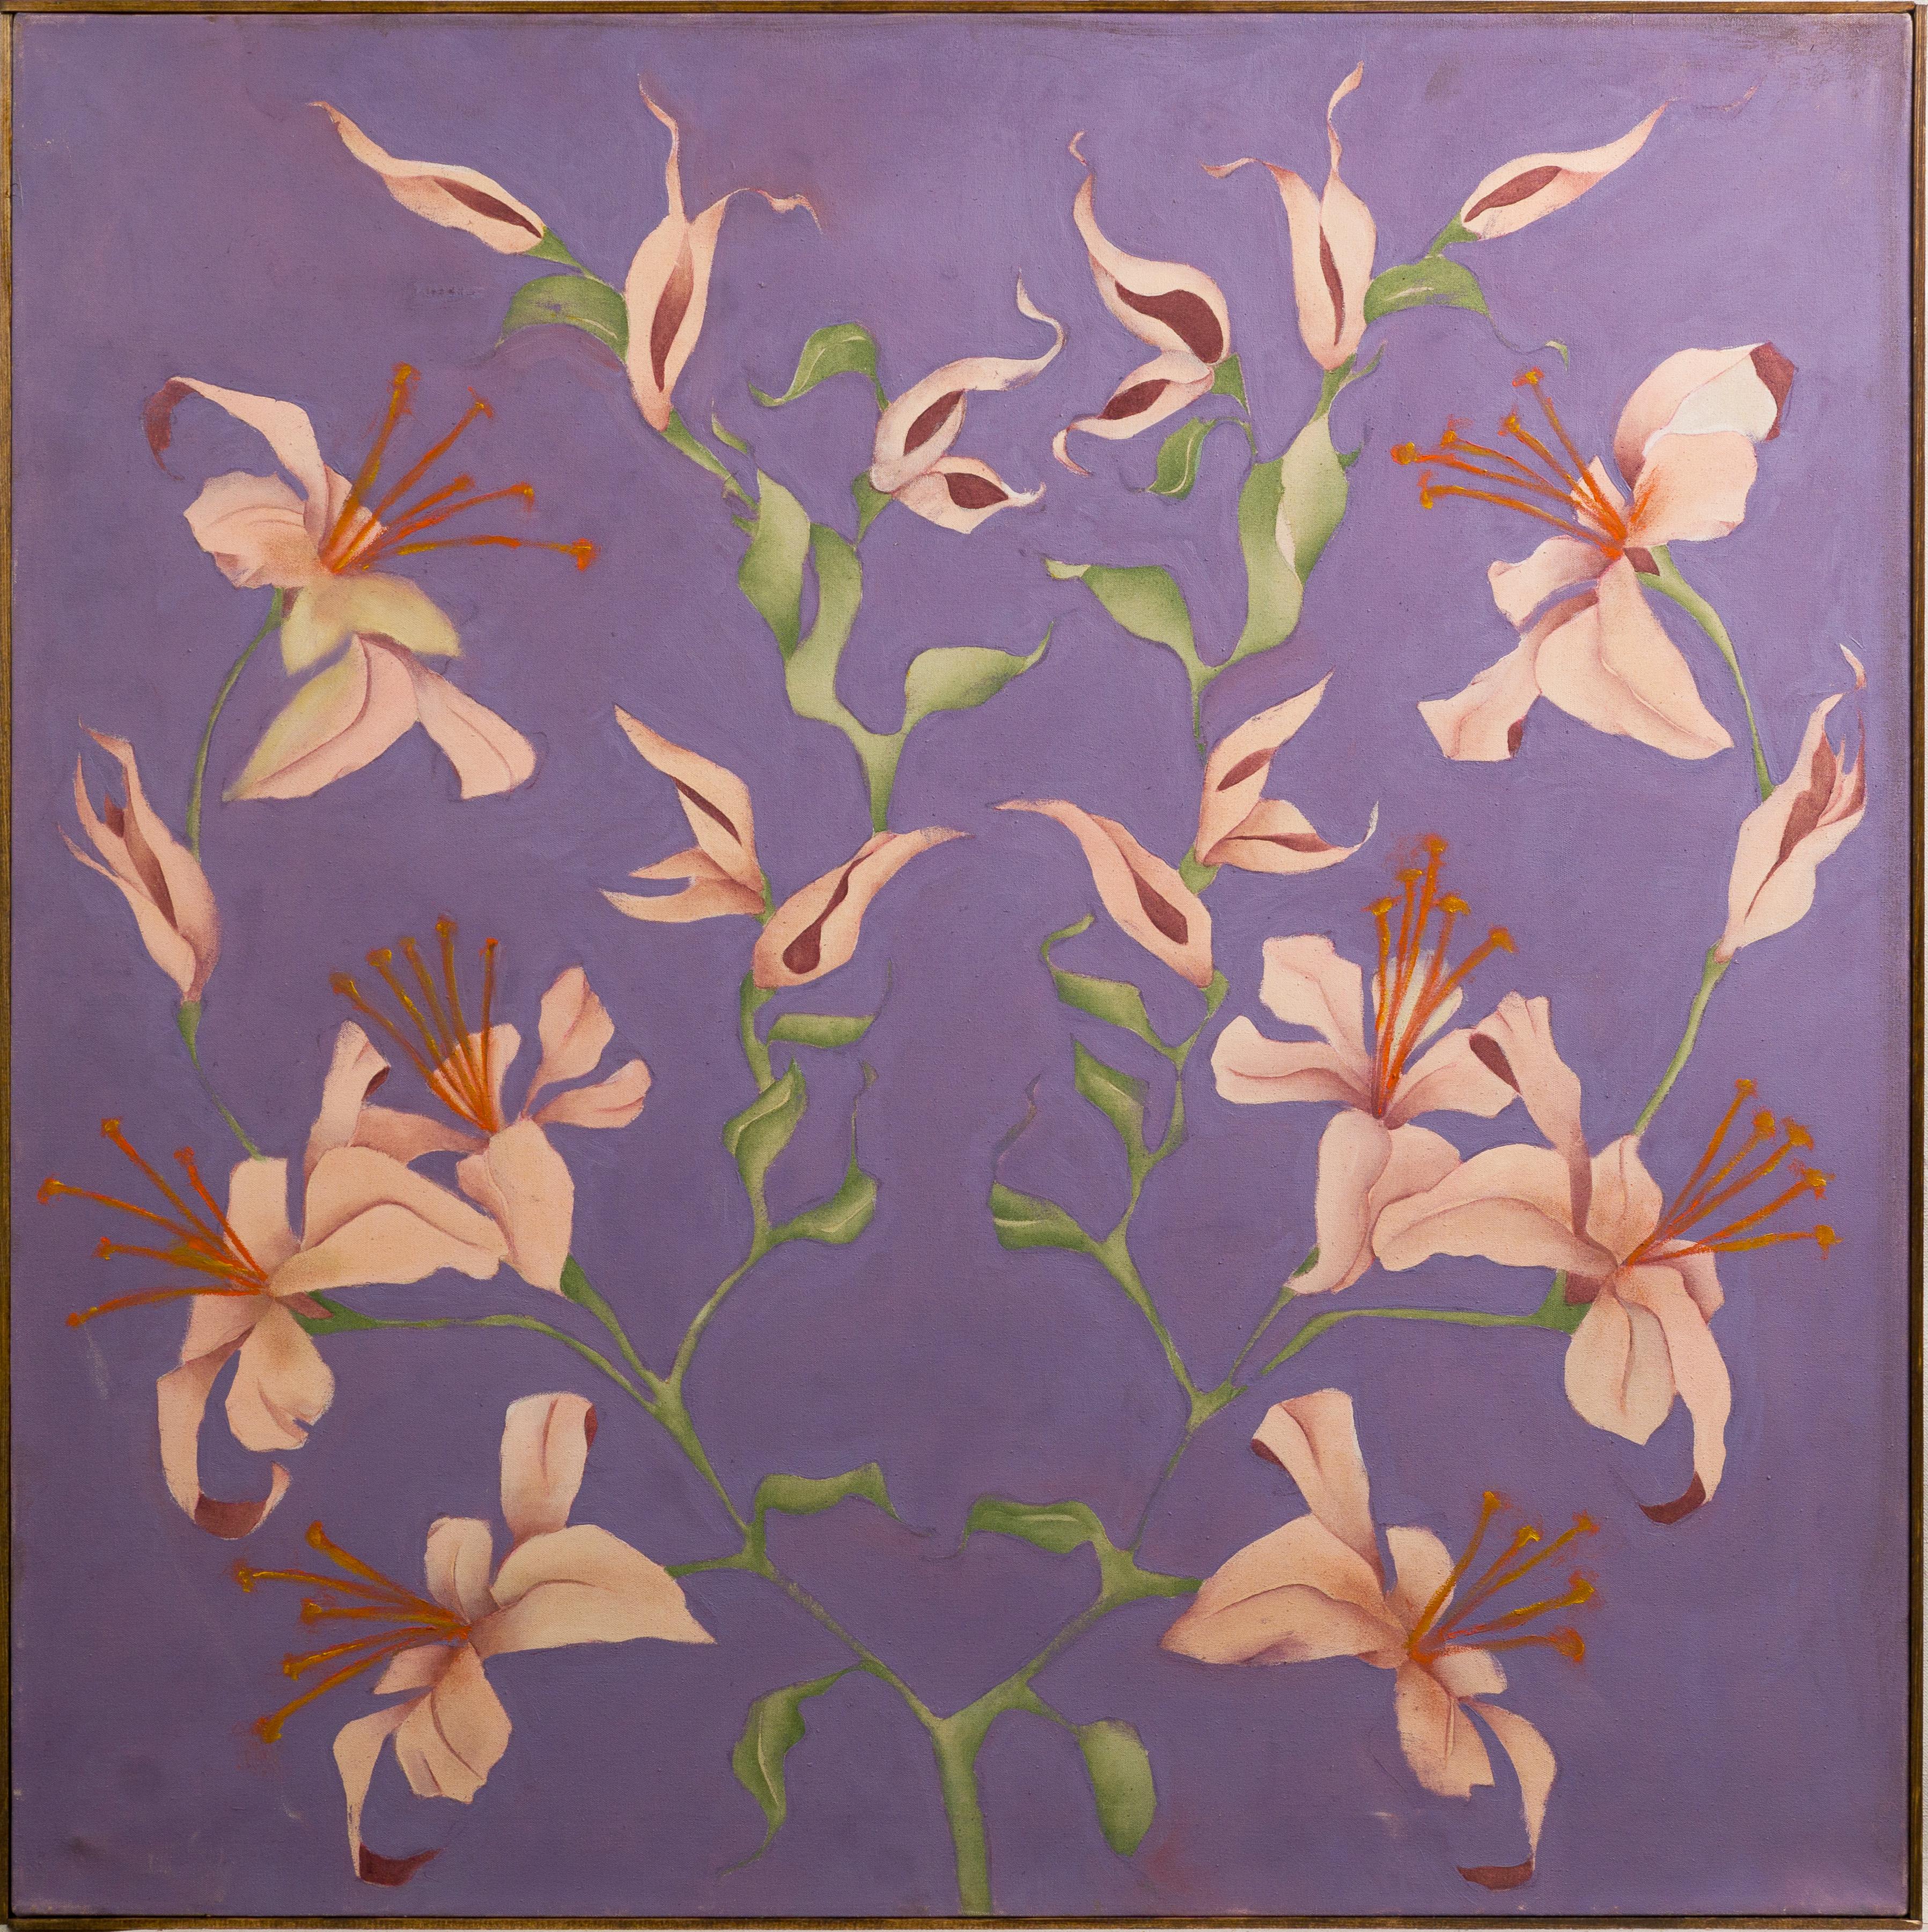 Modernist orchid flower still life oil painting by Abraham Pariente.  Oil on canvas, circa 1980.  Signed.  Displayed in a modernist frame.  Important large and impressive work!